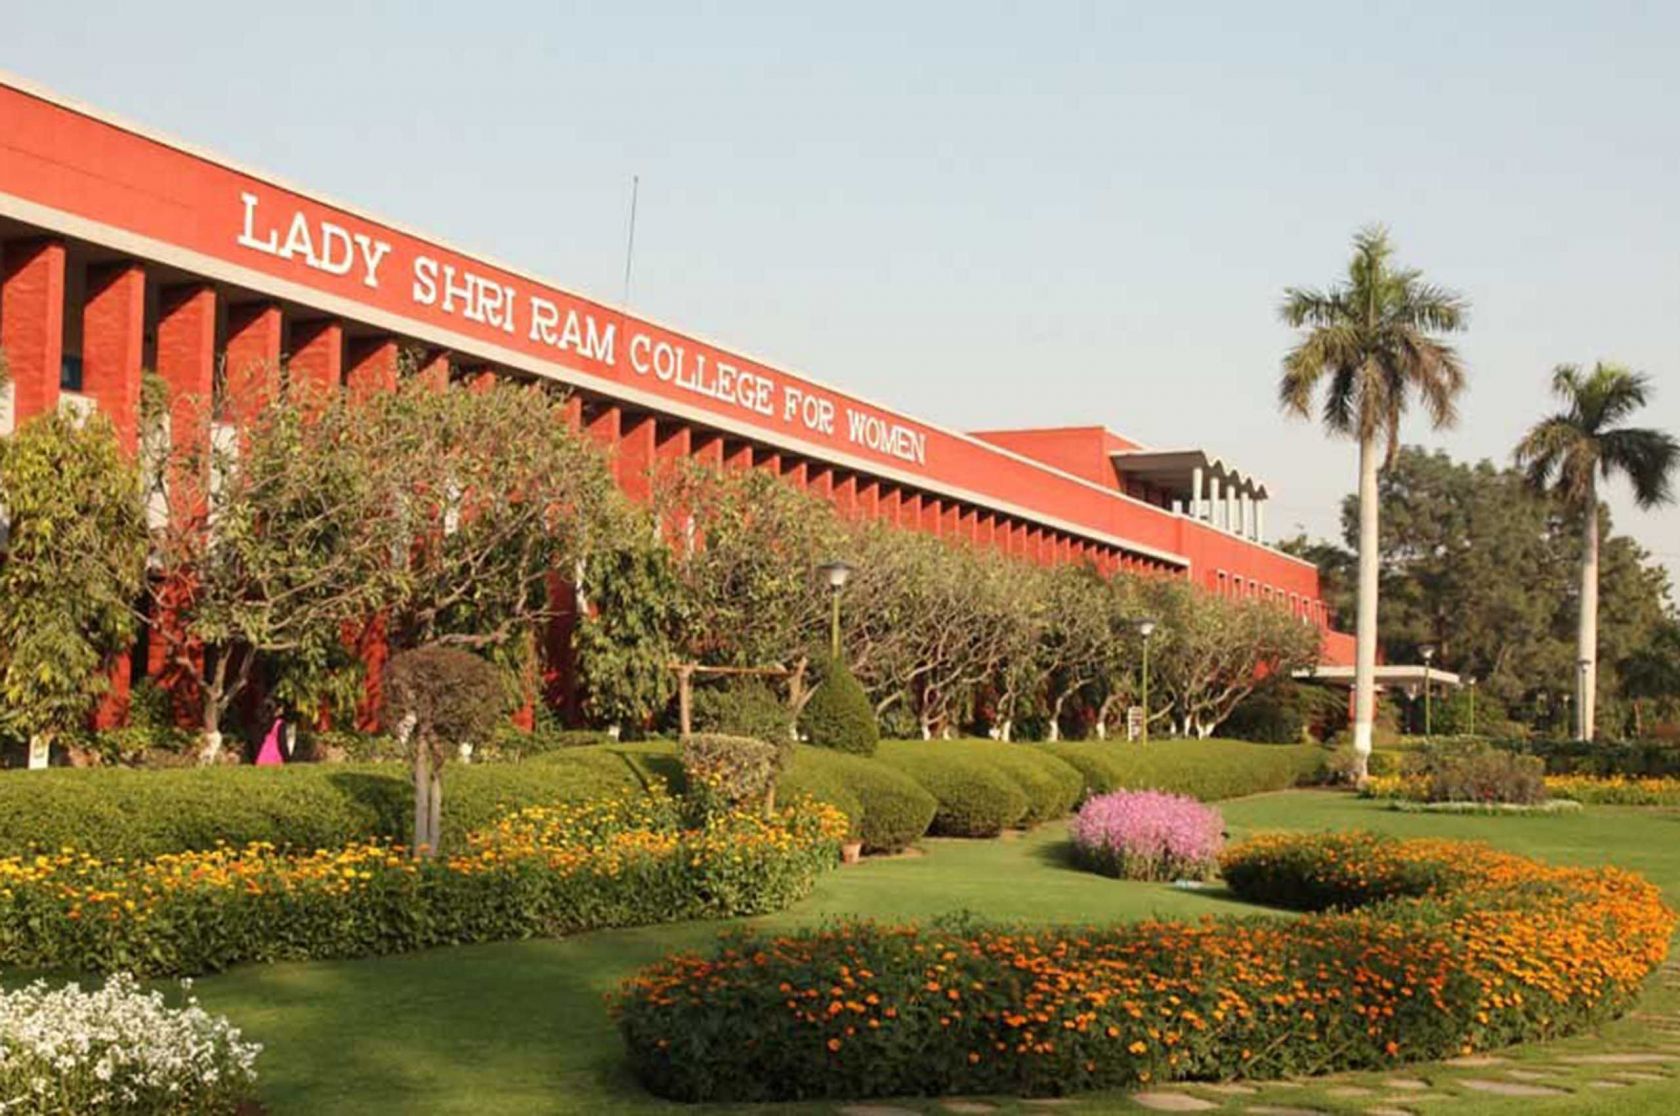 Lady Shri Ram College (Women's College), Careers and Opportunities, La